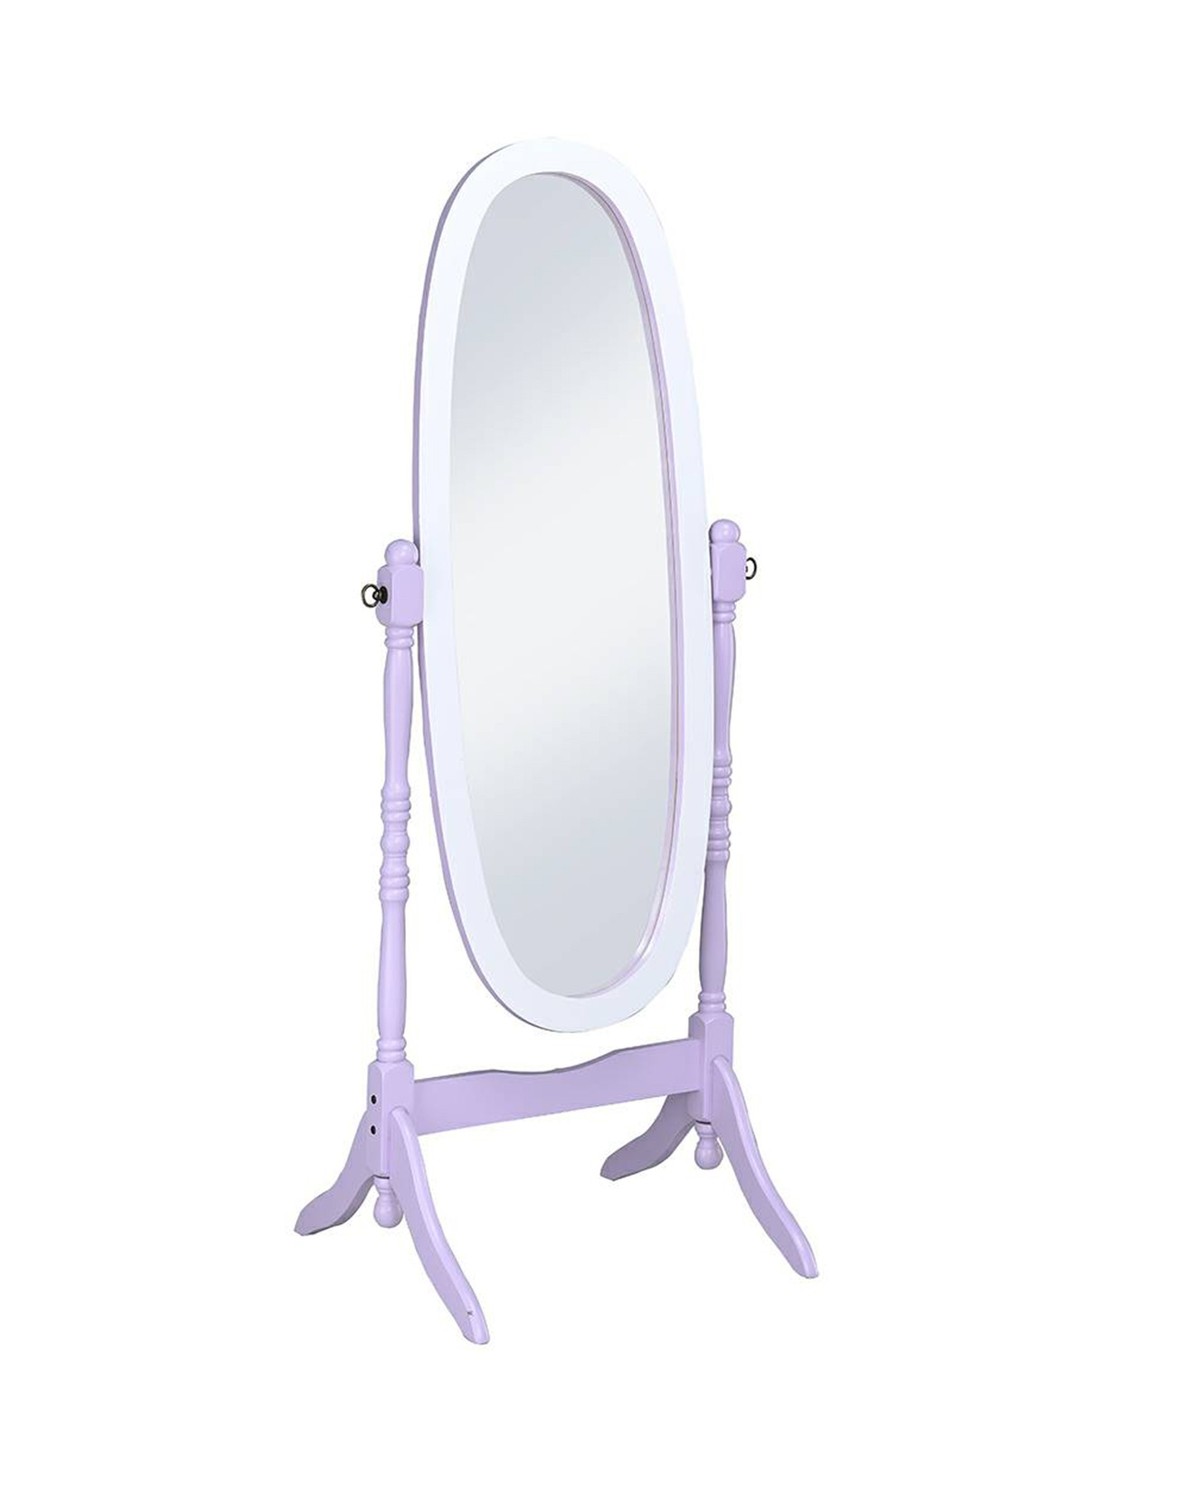 Pretty Pastel Purple and White Cheval Standing Oval Mirror